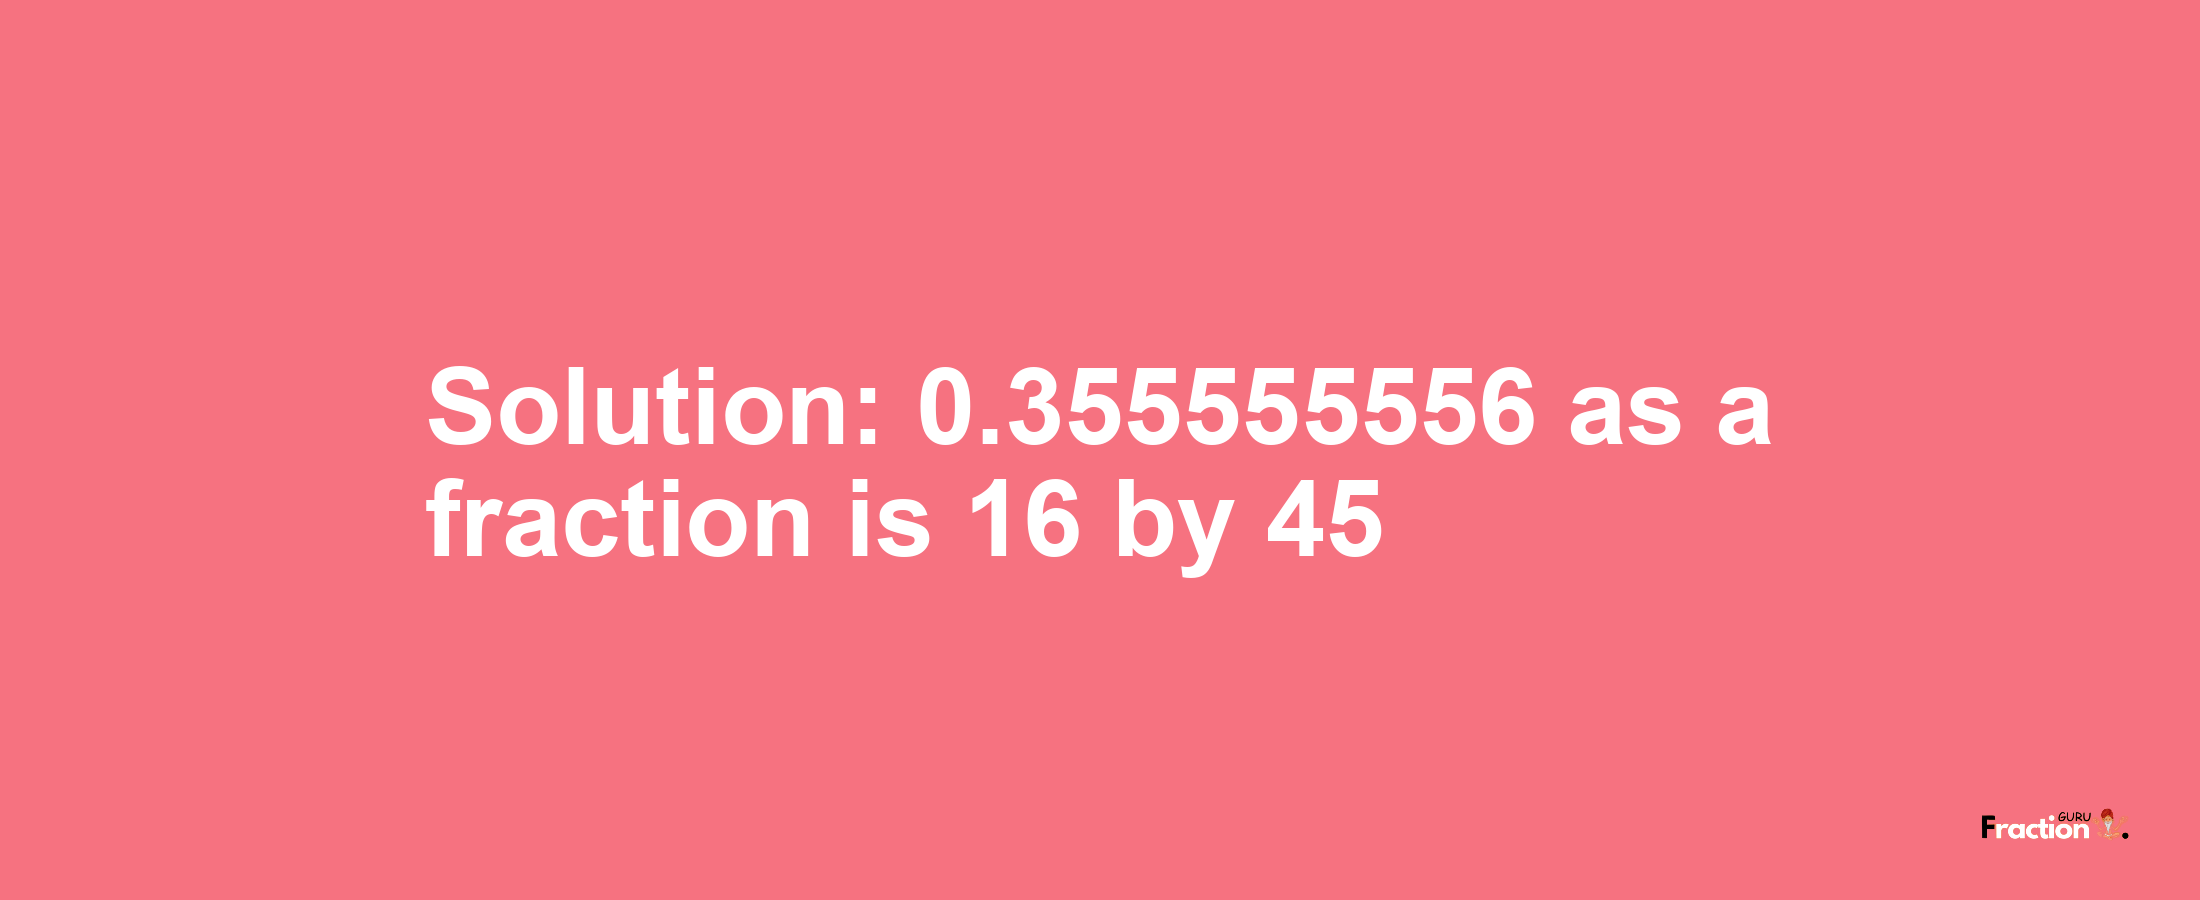 Solution:0.355555556 as a fraction is 16/45